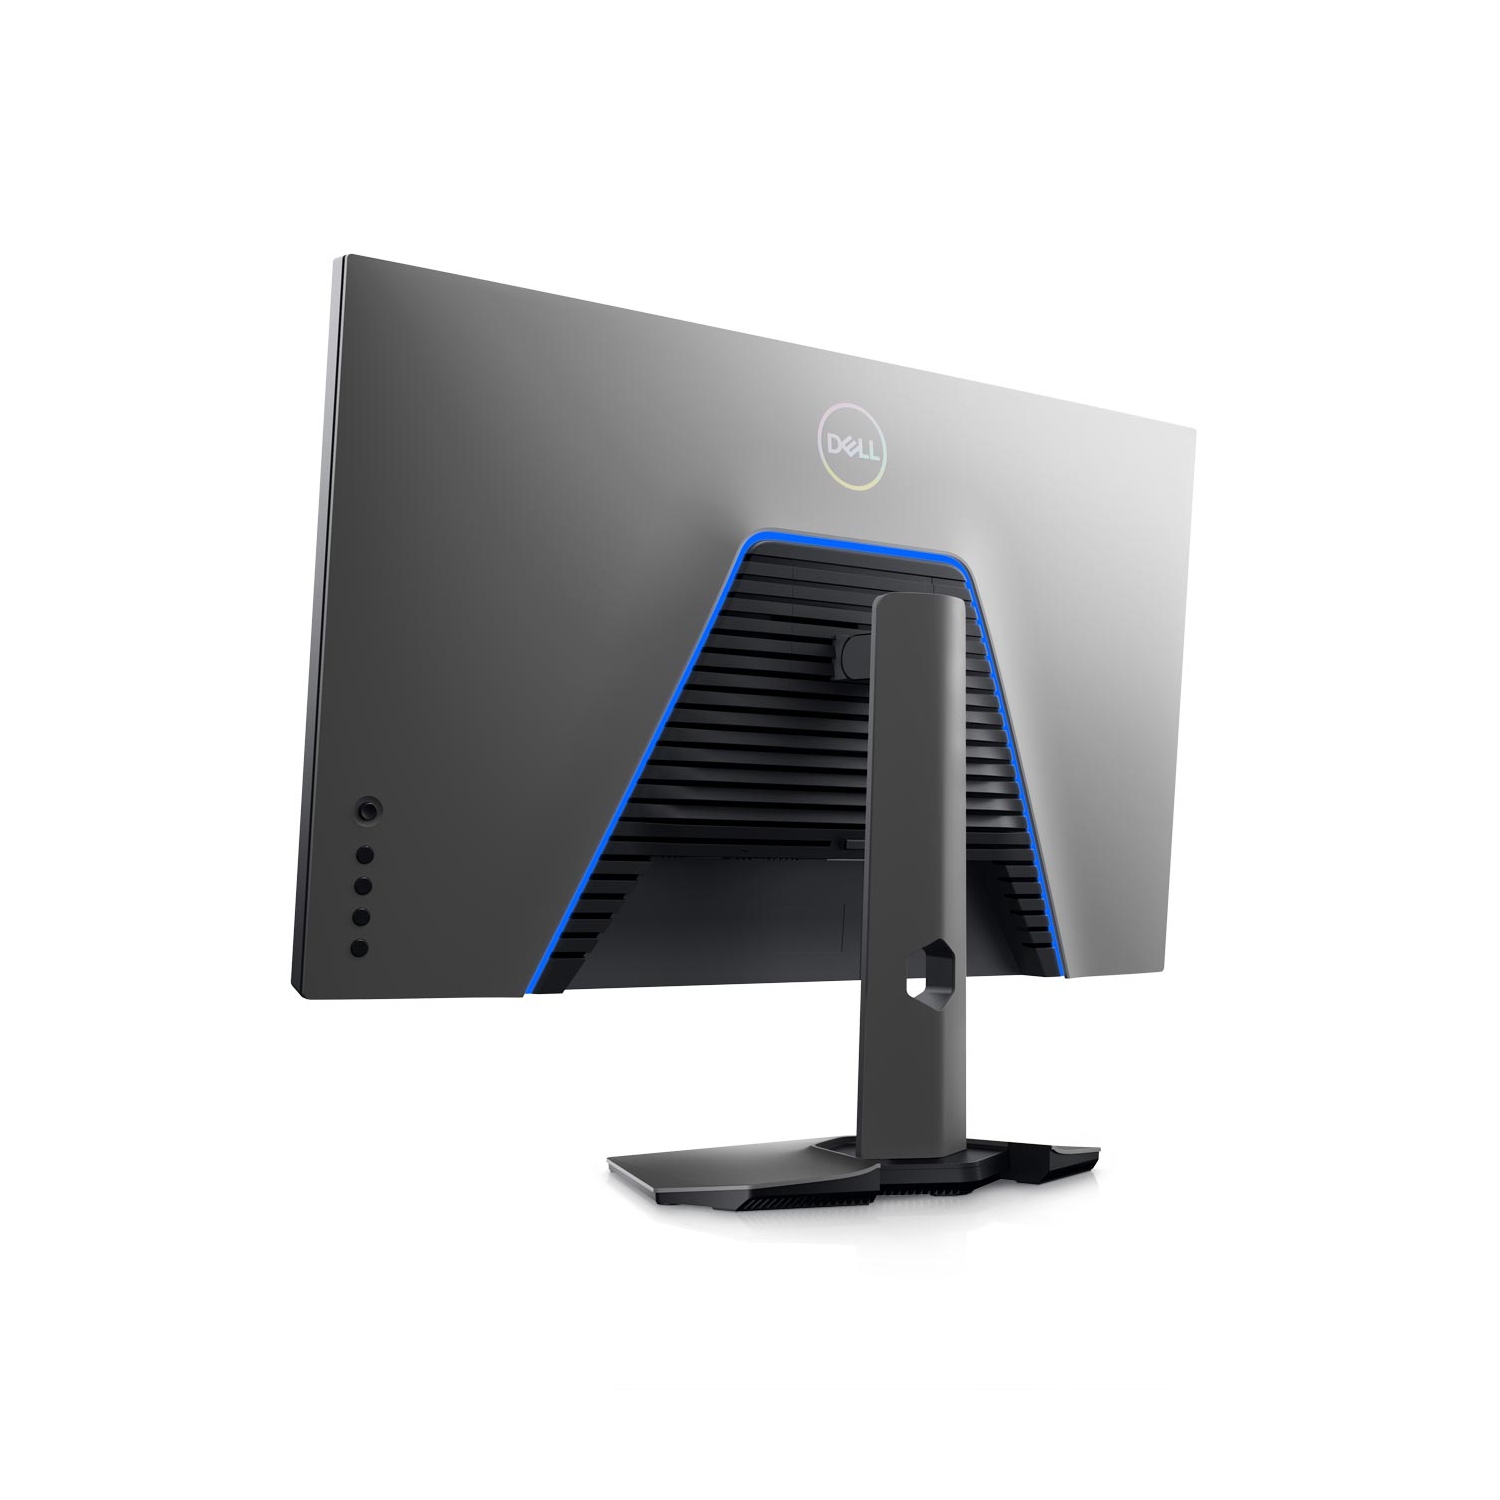 Dell 32 4K UHD Gaming Monitor with 144Hz Refresh Rate and 95% DCI